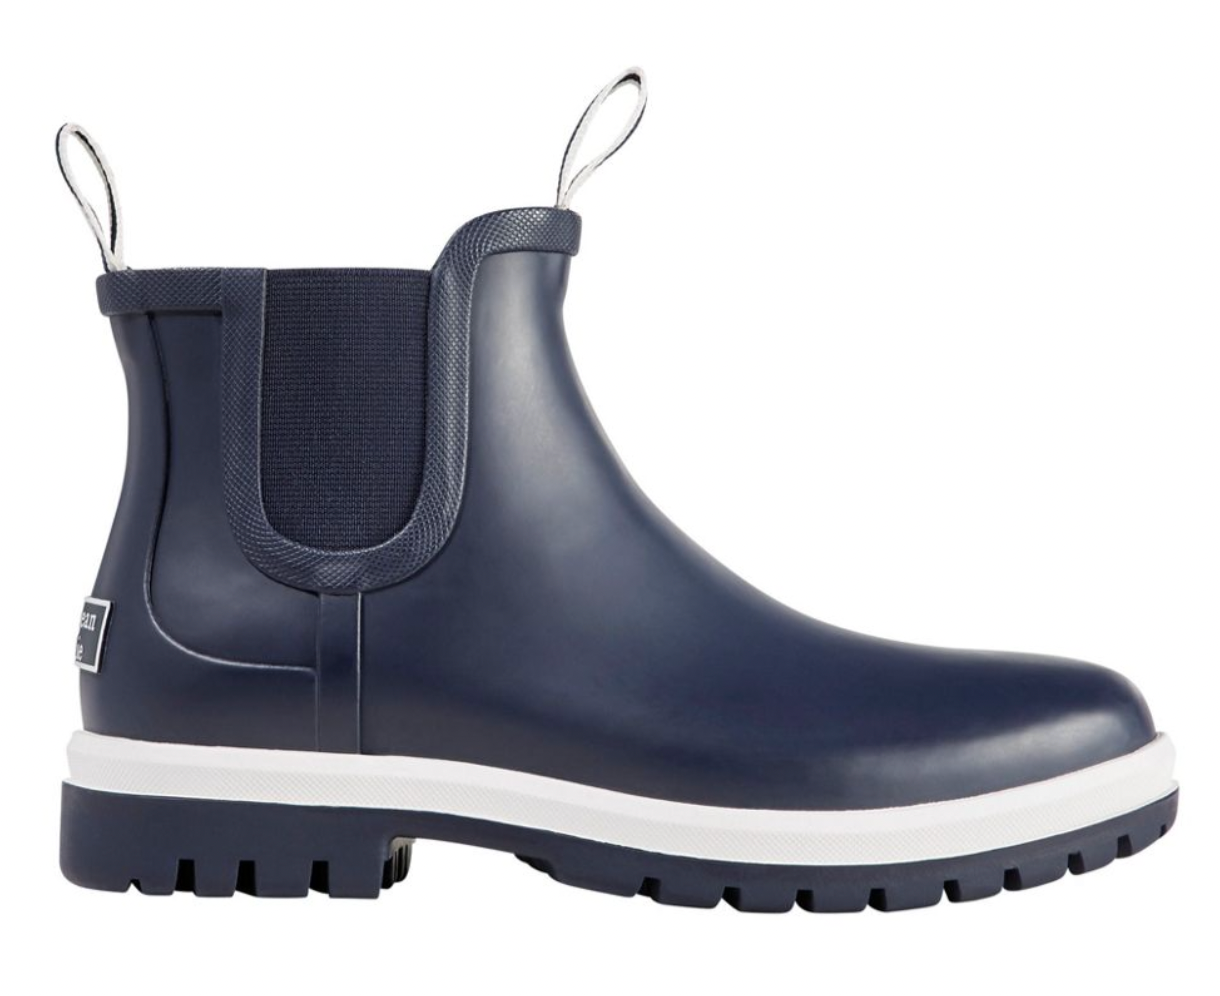 L.L. Bean Rugged Wellie Chelsea Boots